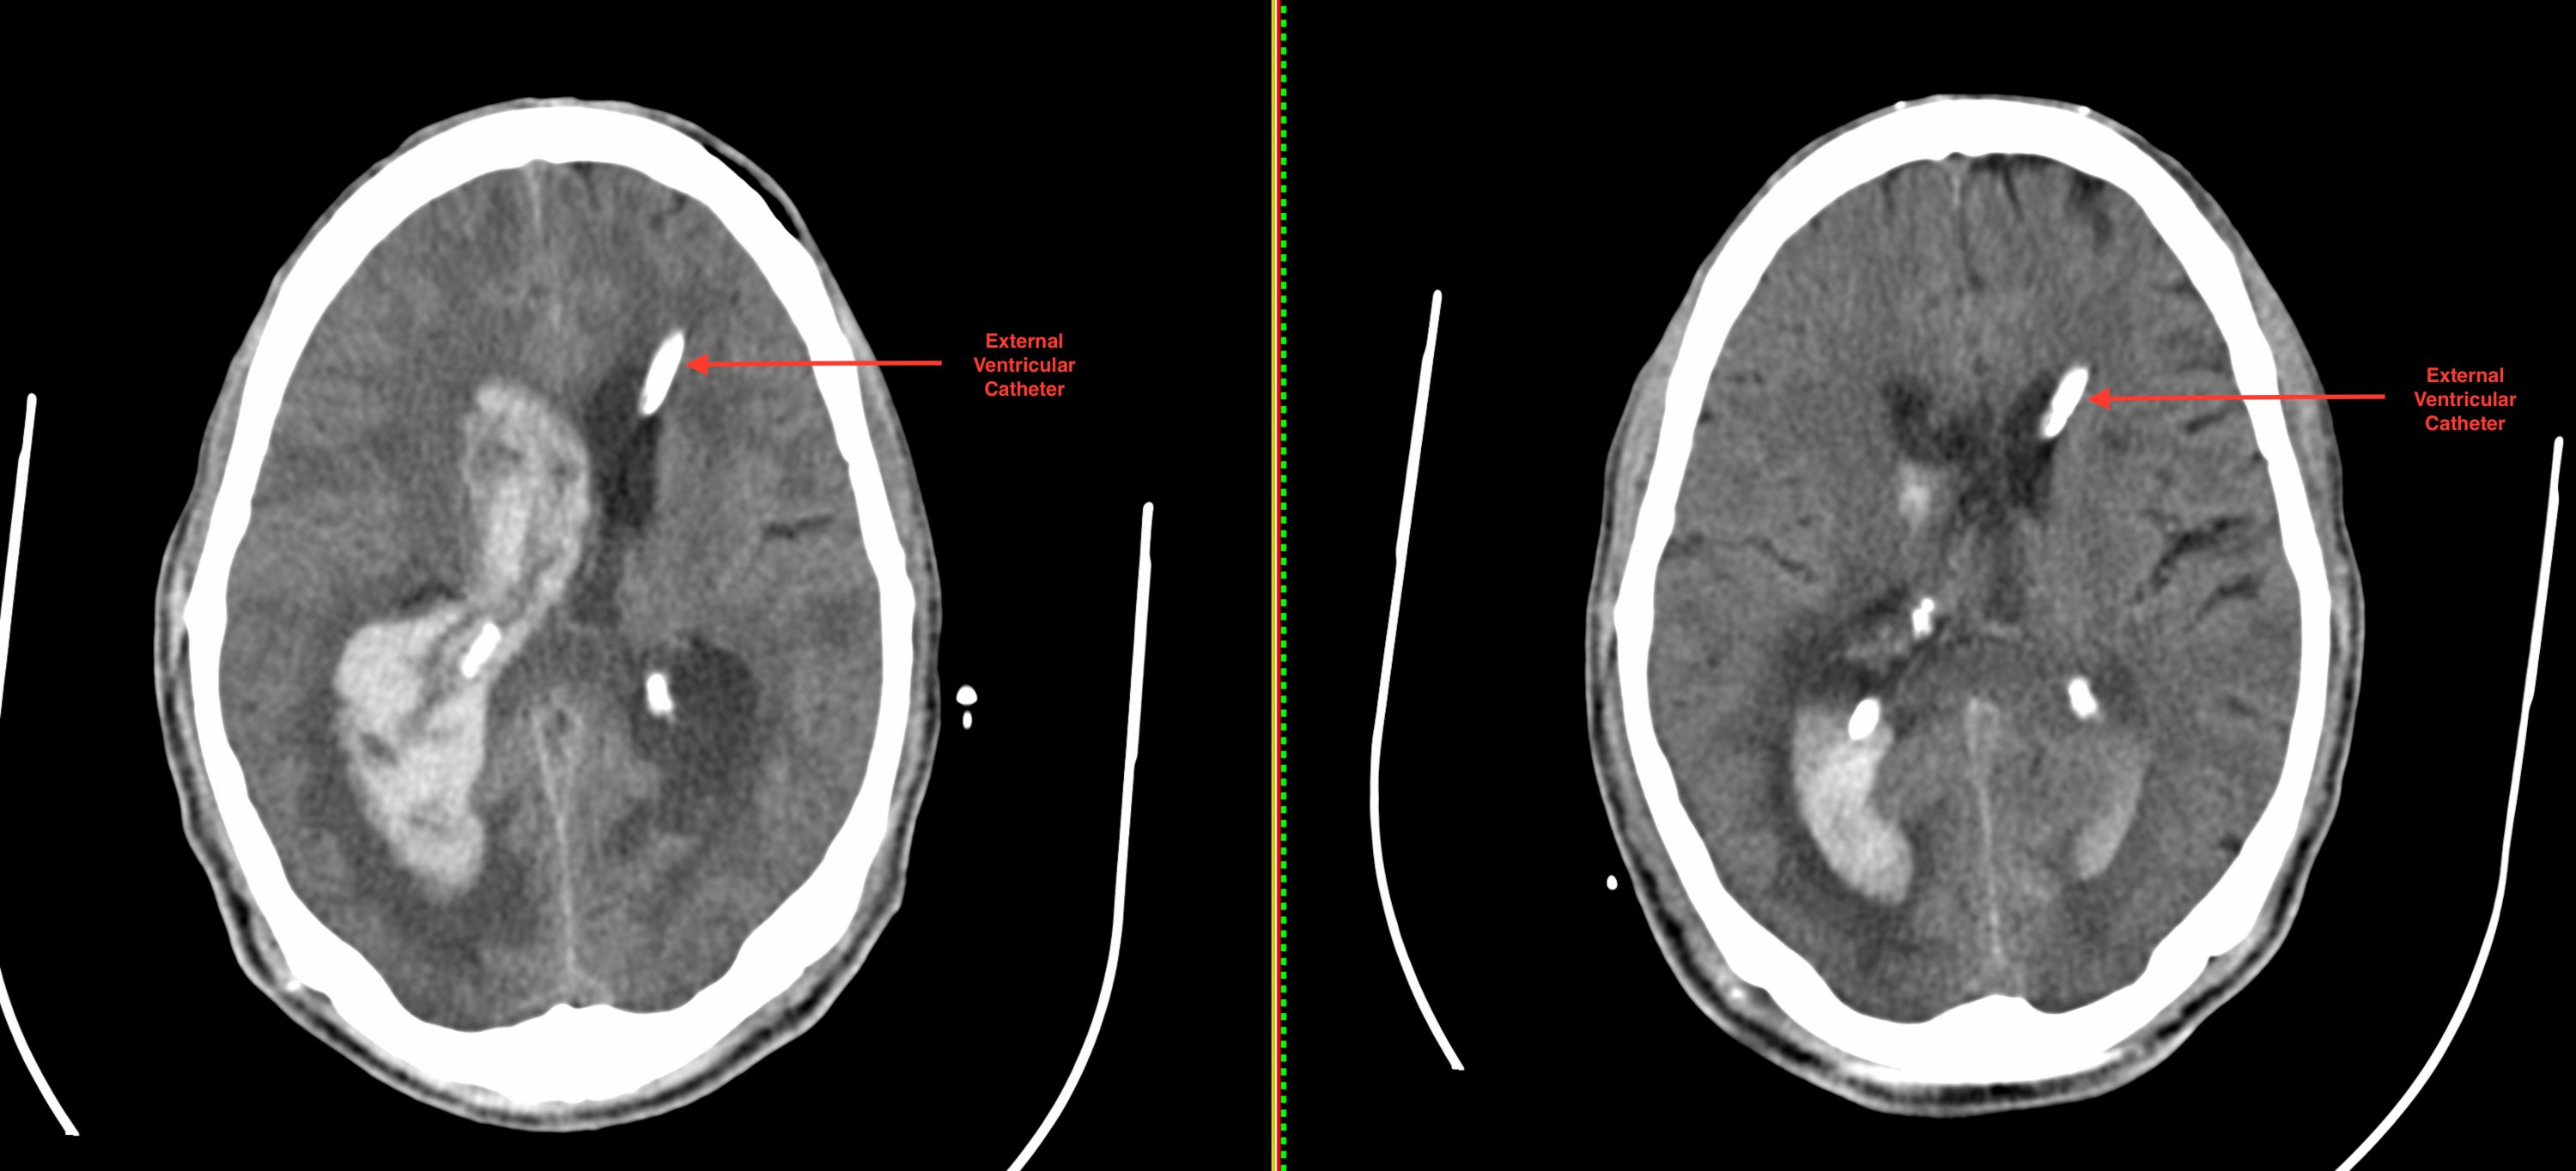 What are the recommended medical treatments for a hemorrhagic stroke?